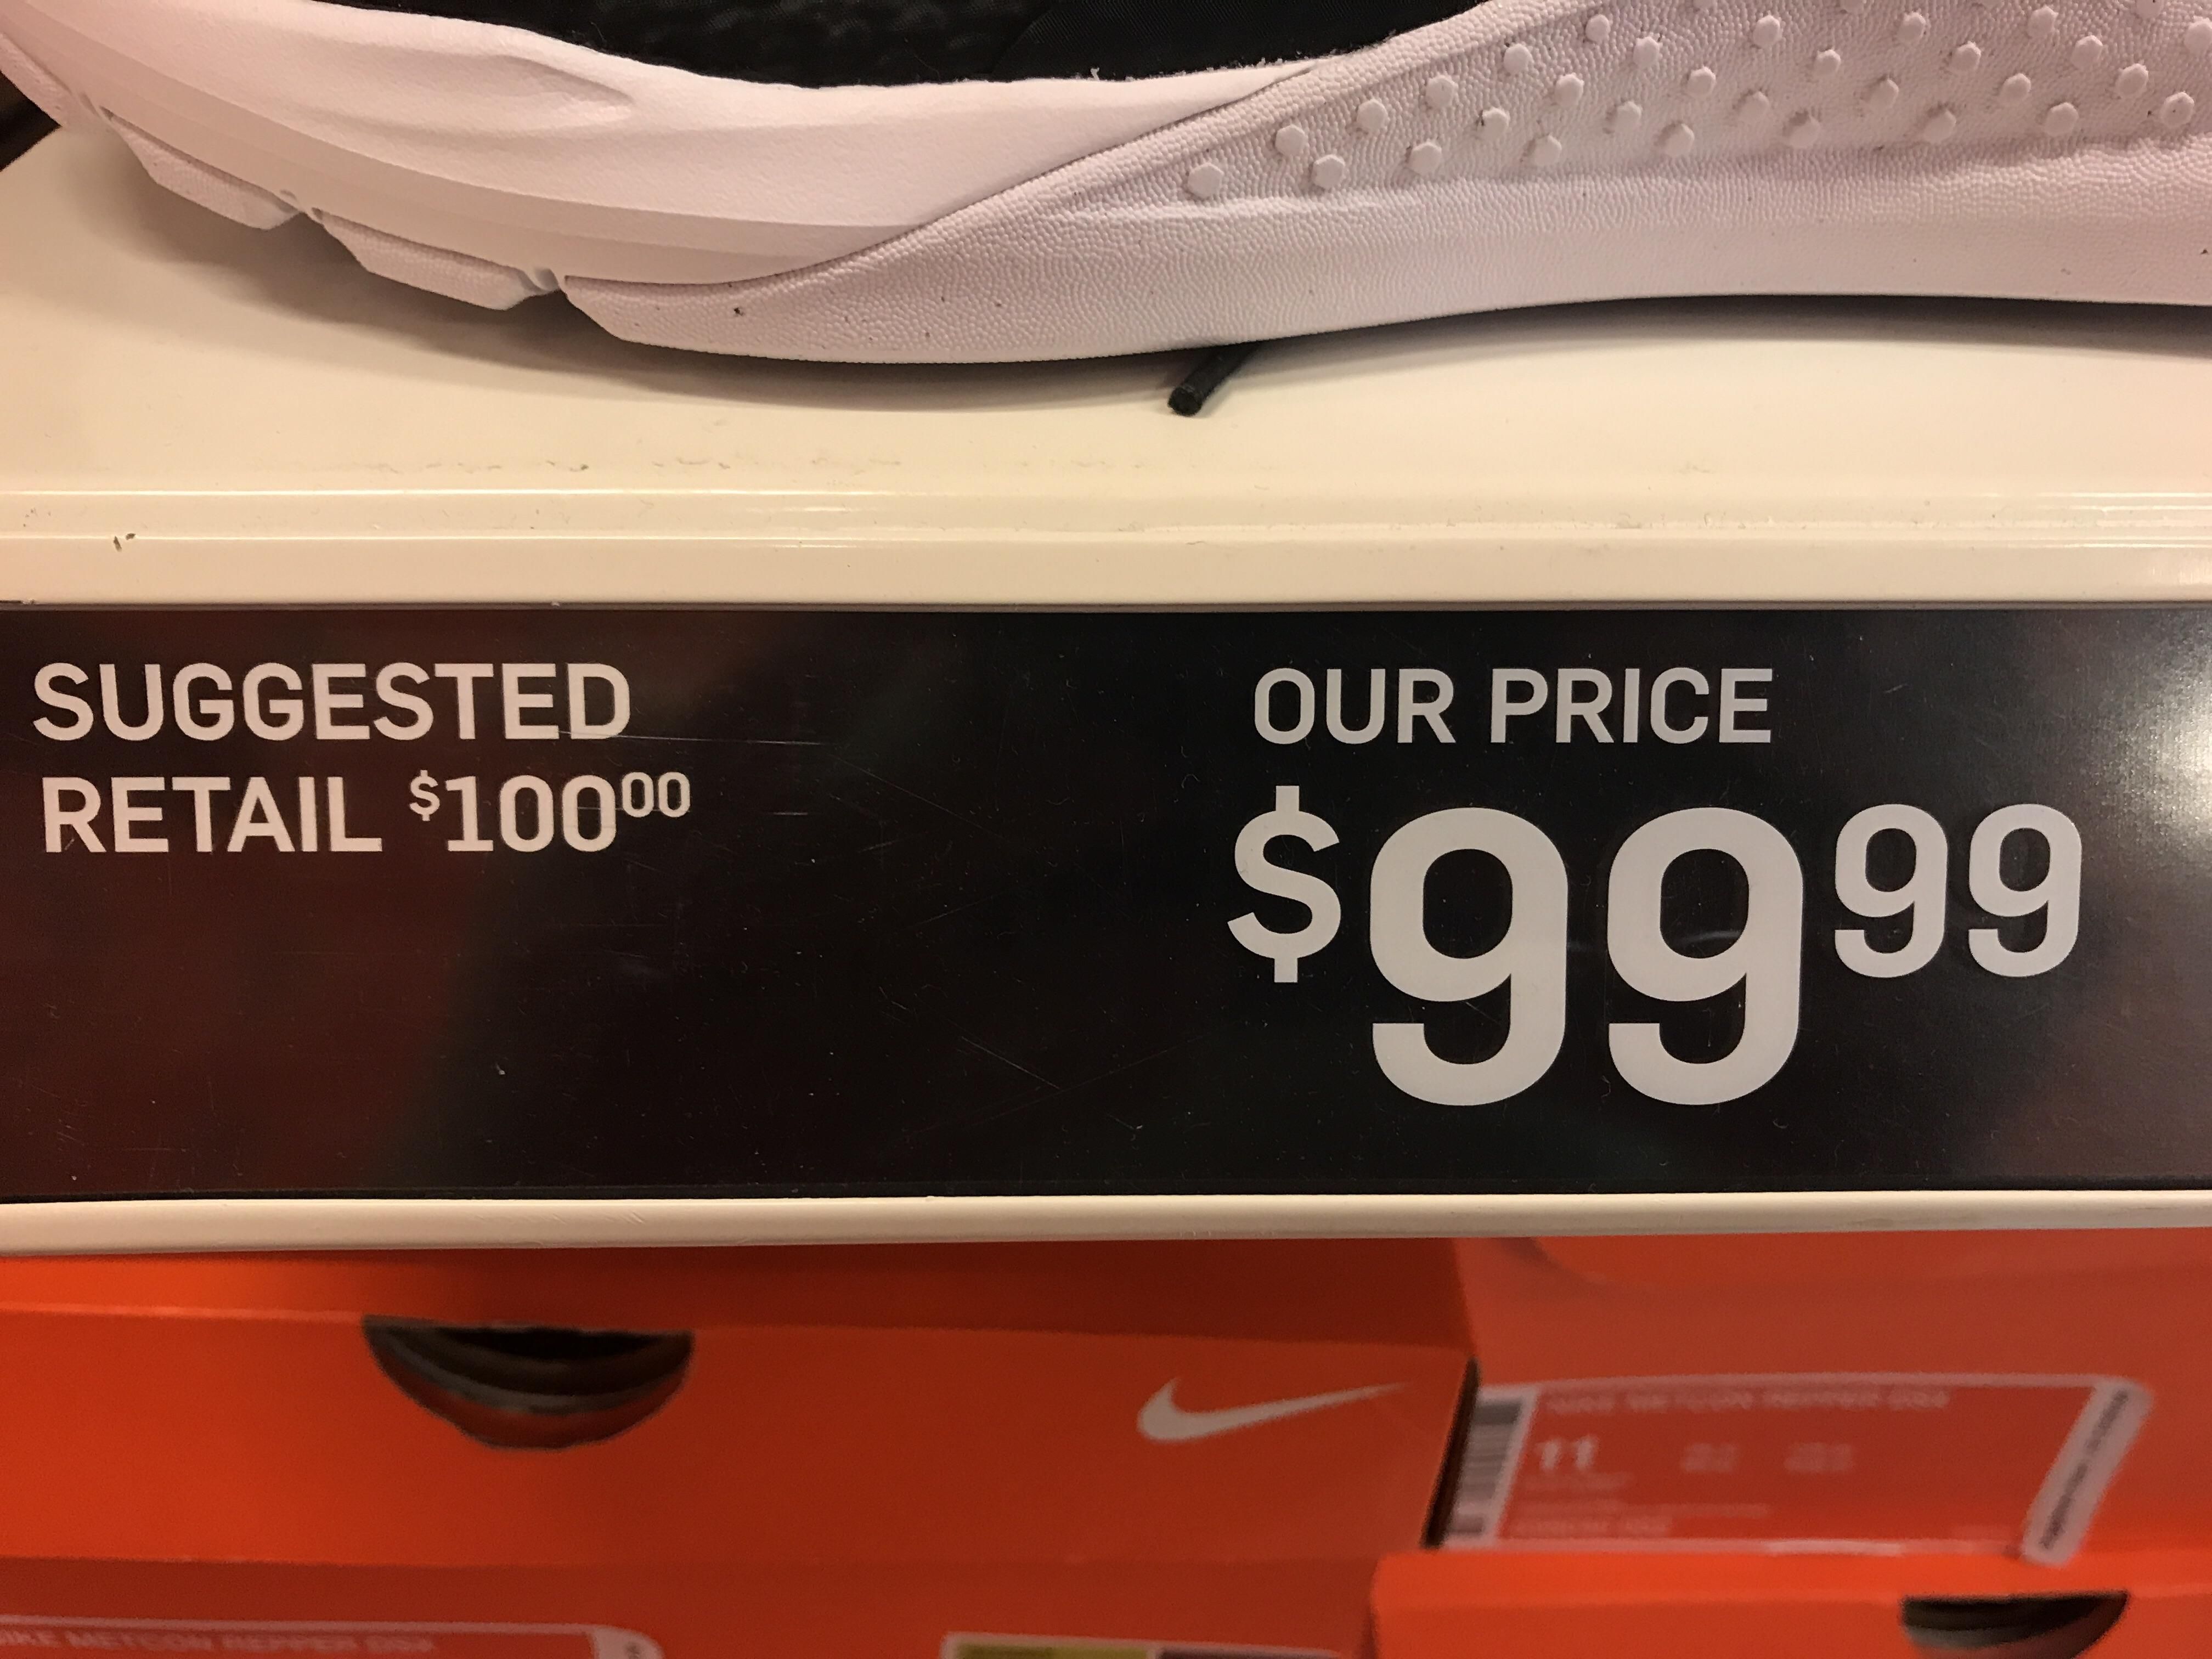 Great discount!